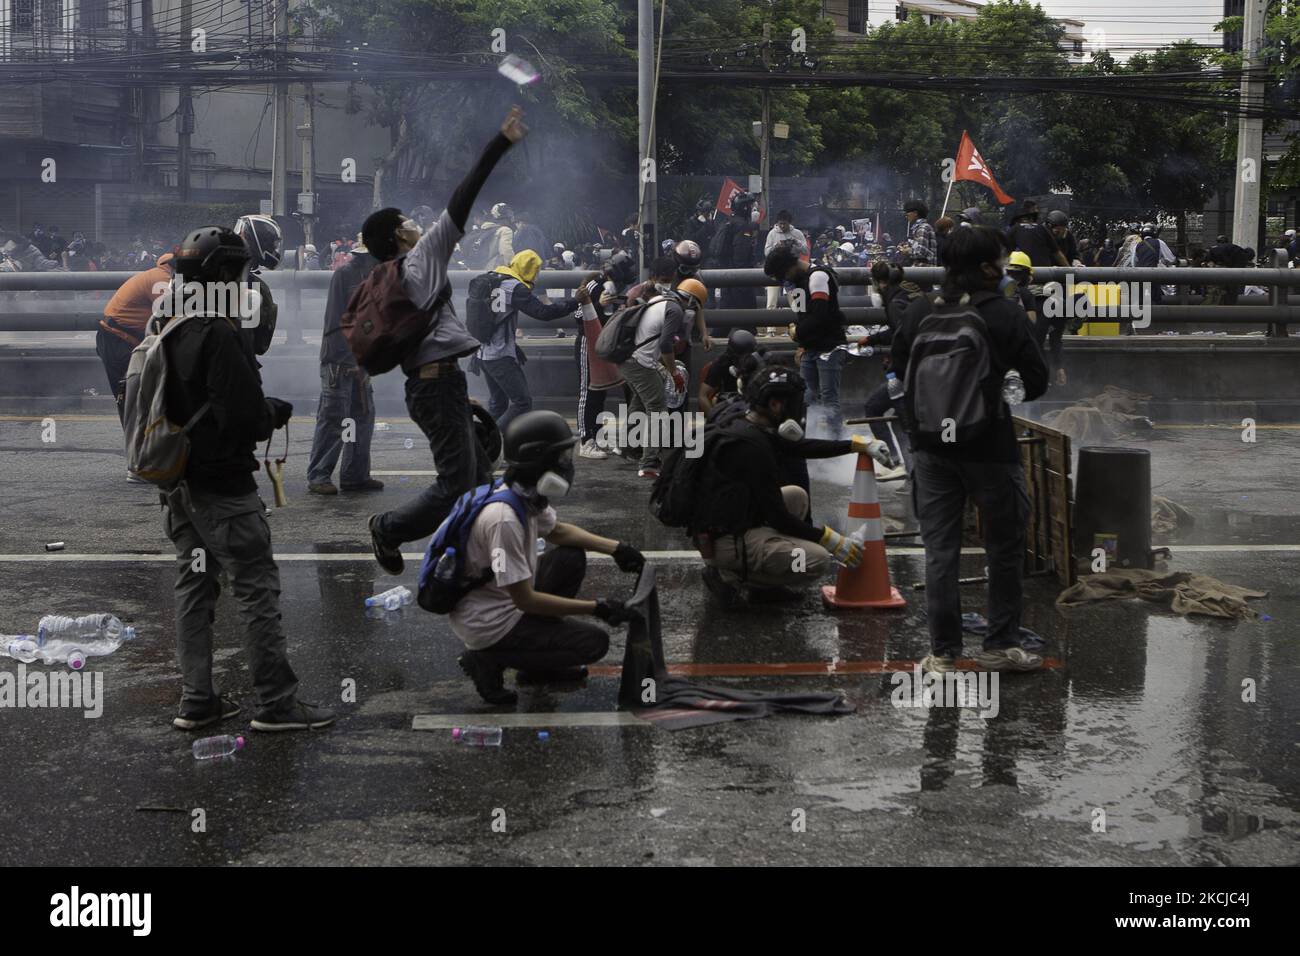 The anti-government protest at the Samliam Din Daeng Intersection near PM Prayut Chan-o-cha's residence, where police are tear-gassing protesters on August 7, 2021 in Bangkog, Thailand. (Photo by Atiwat Silpamethanont/NurPhoto) Stock Photo